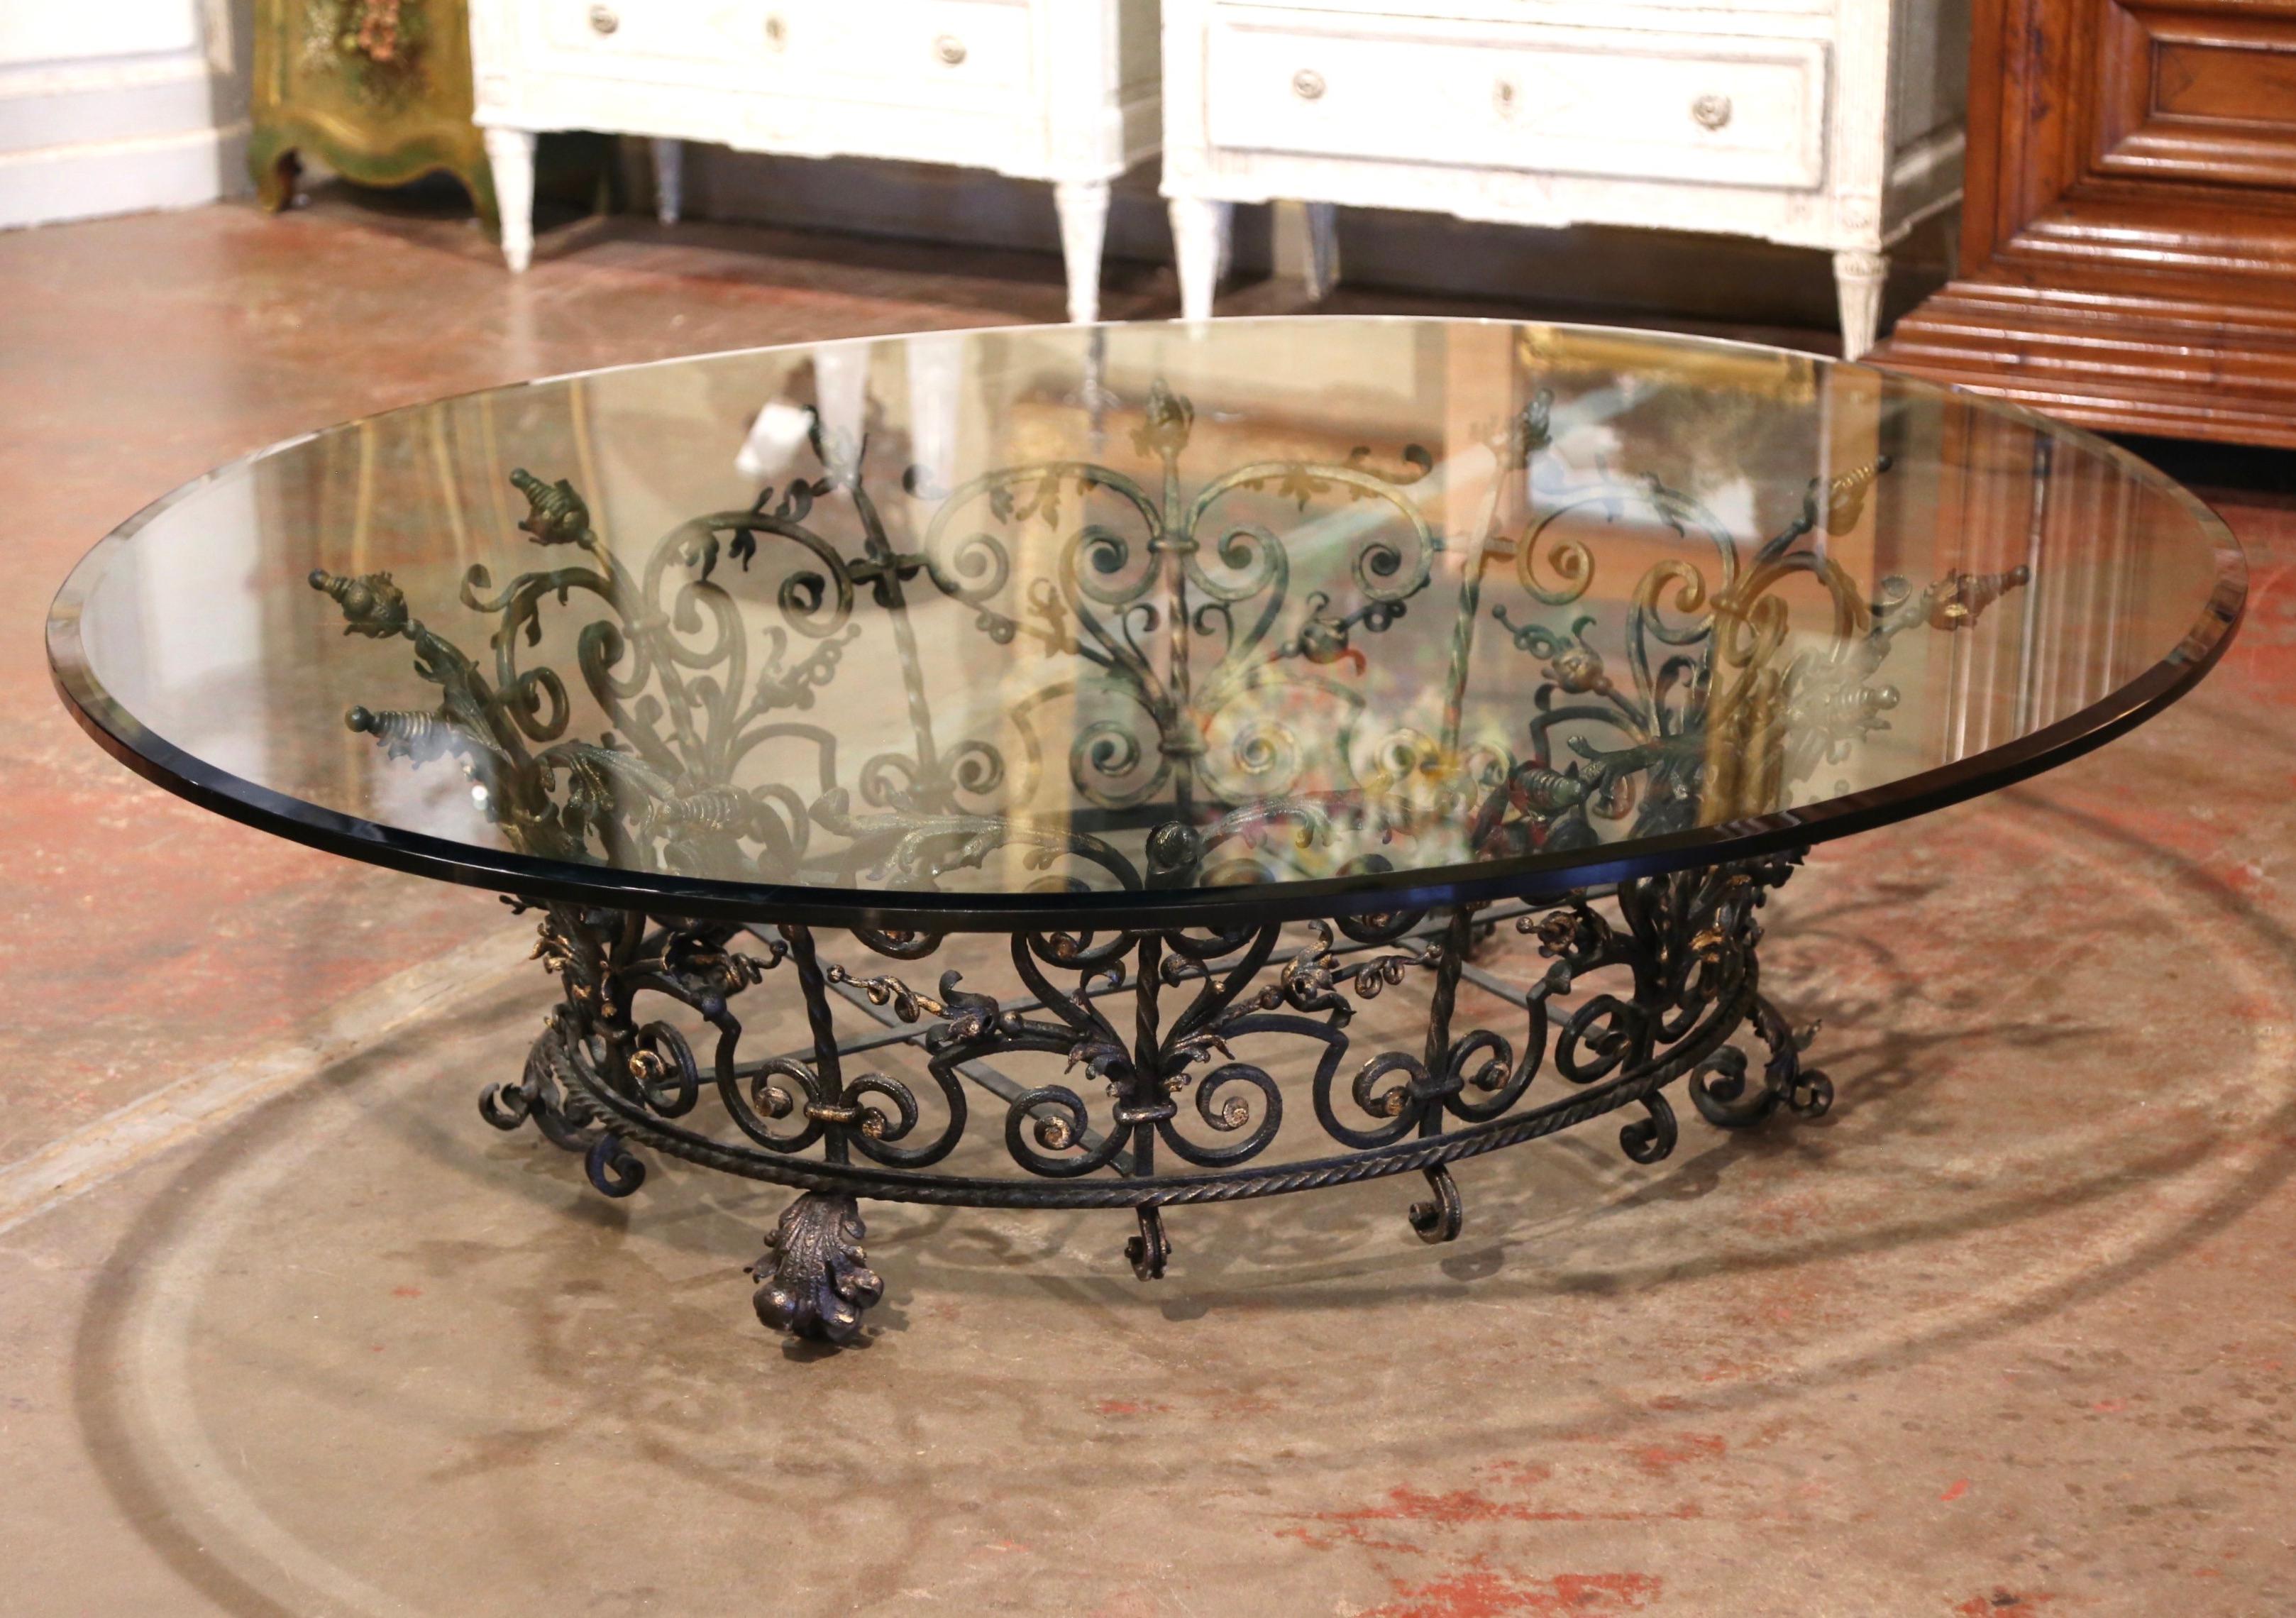 This incredibly heavy round low table would make an interesting addition to any living room, sitting area, office, or den-- it could even be used on a back patio or porch. The black metal base was crafted using ornate antique wrought iron from